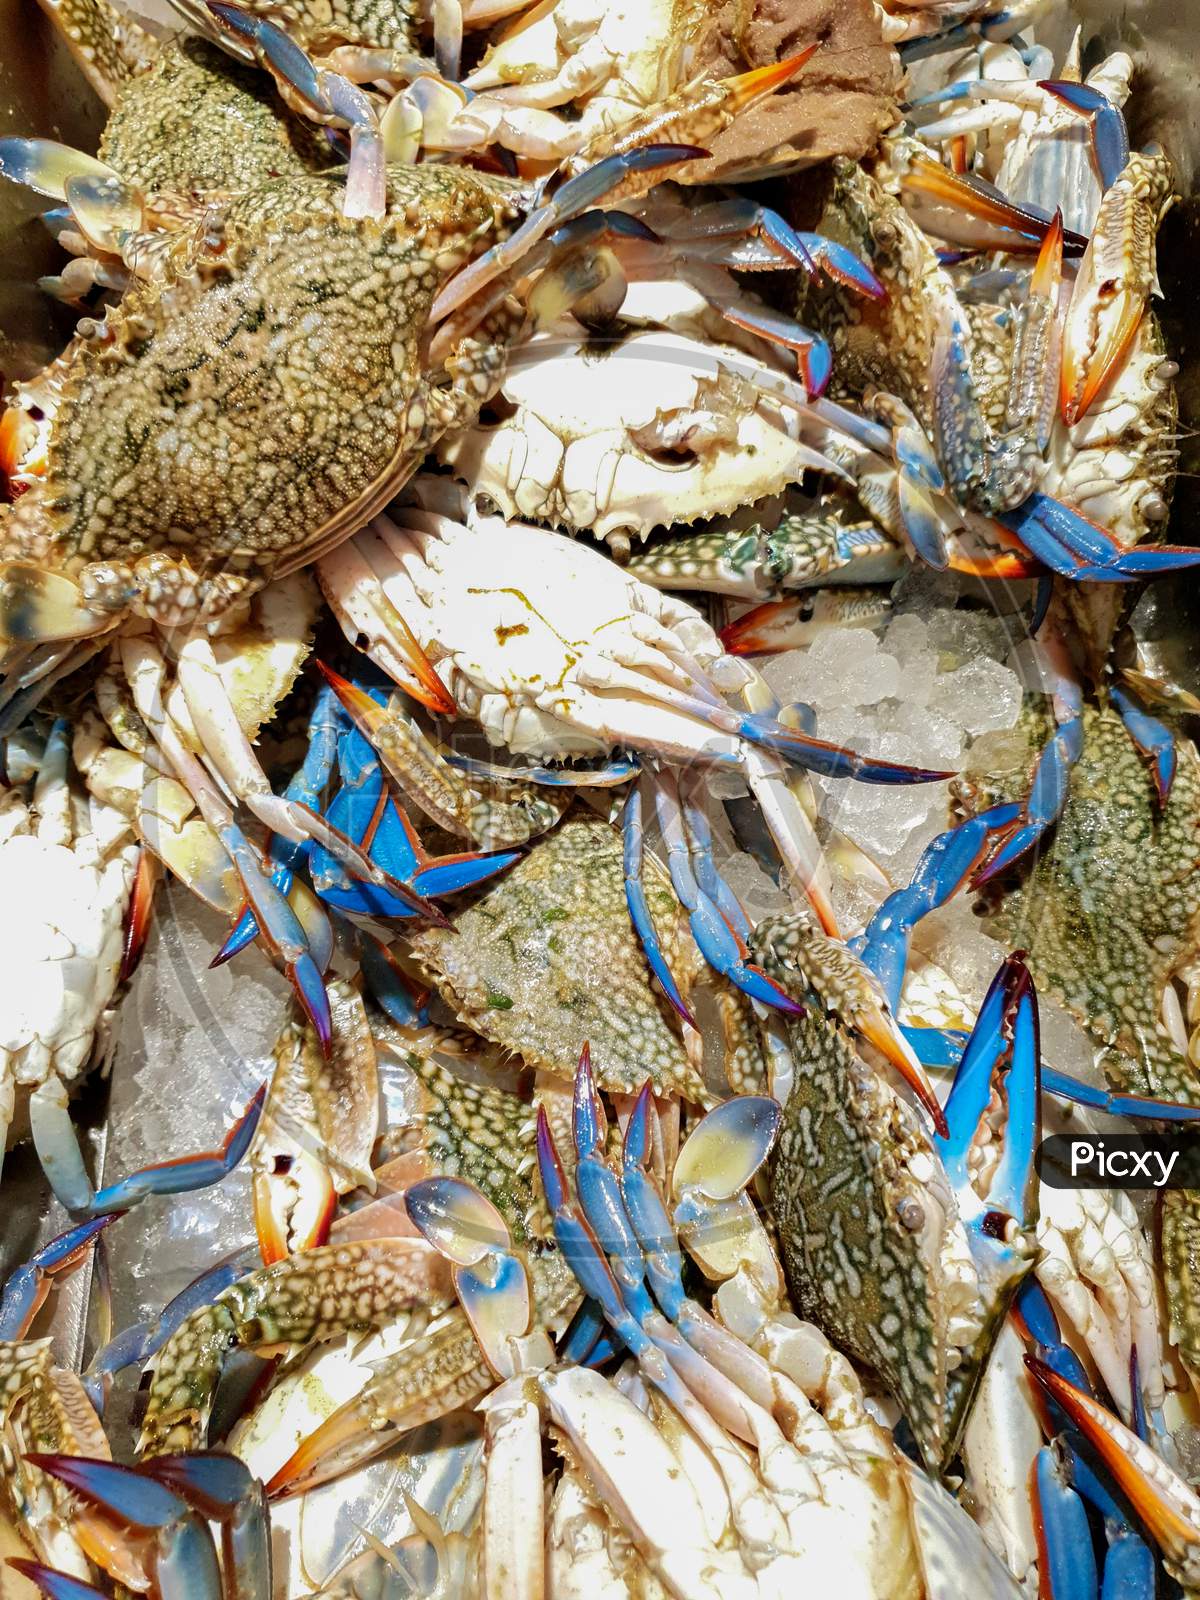 Crabs In Ice For Sale In Seafood Market